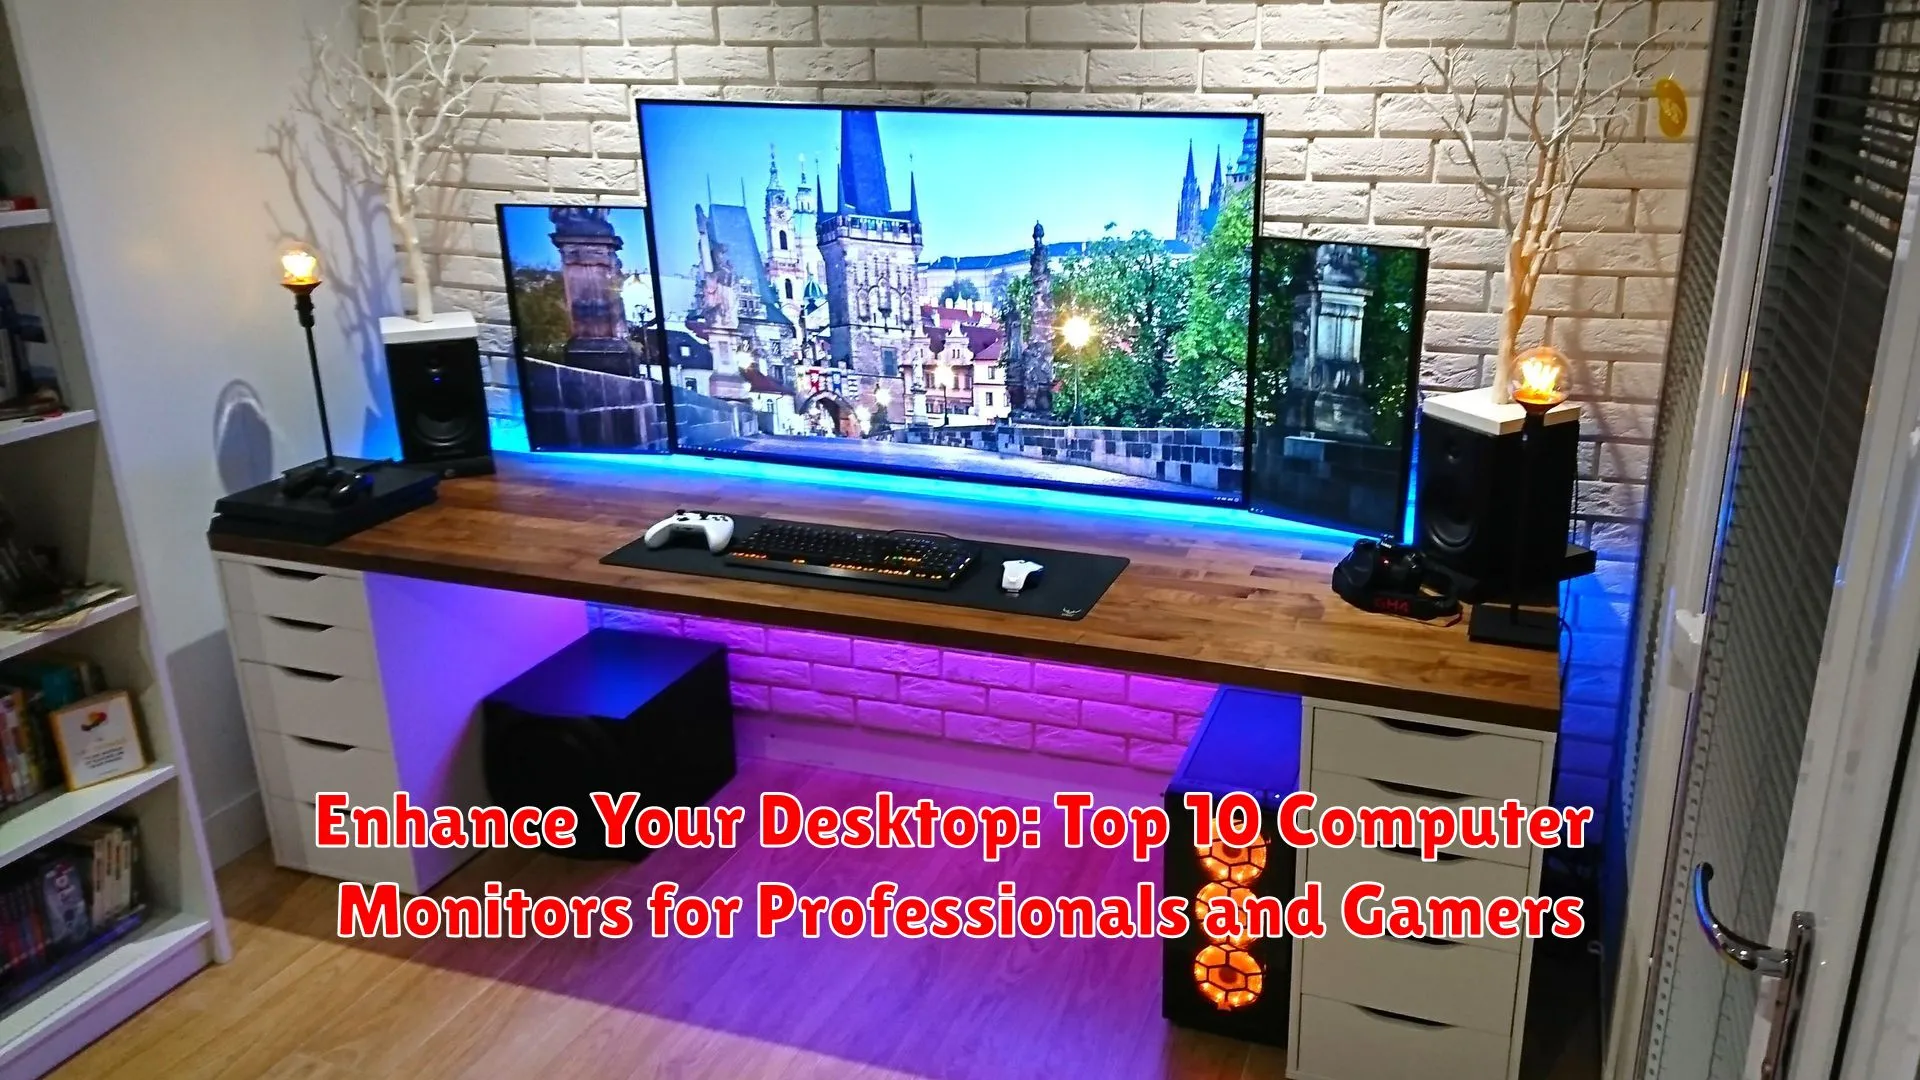 Enhance Your Desktop: Top 10 Computer Monitors for Professionals and Gamers